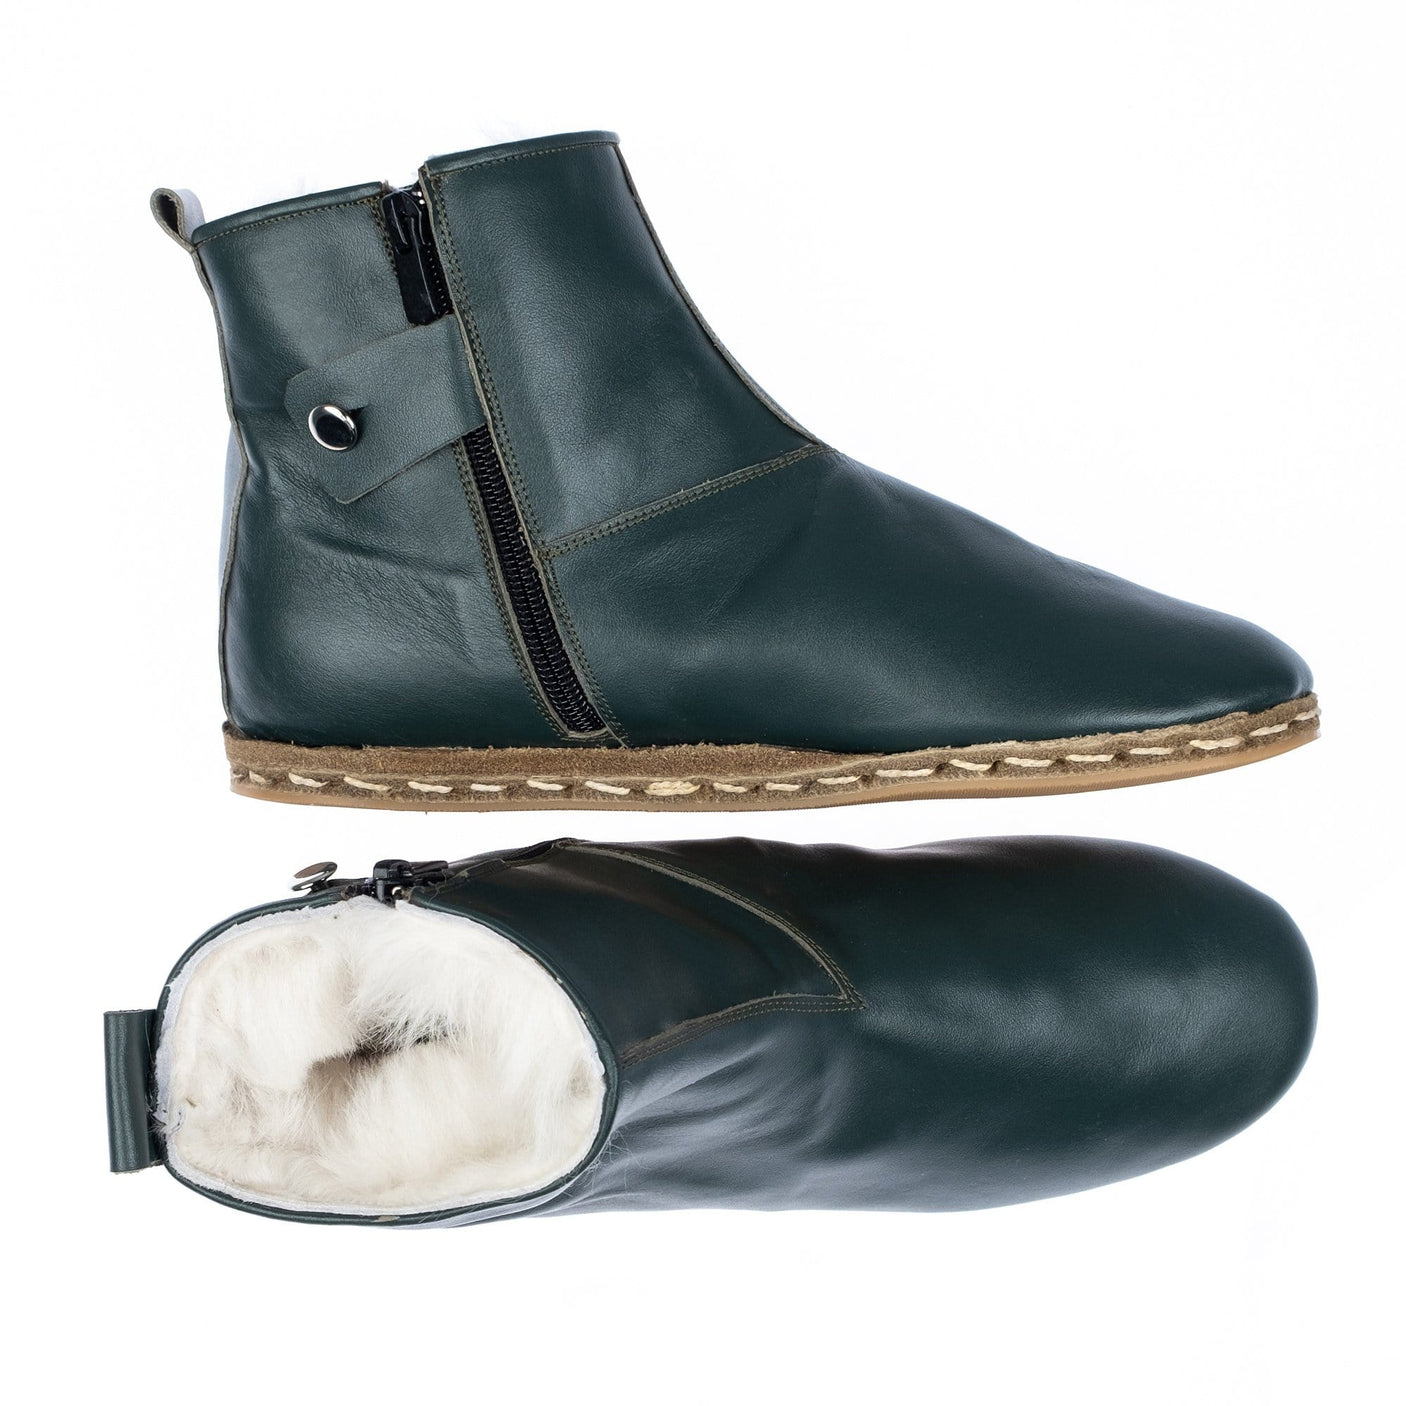 Men's Leather Green Shearling Boots